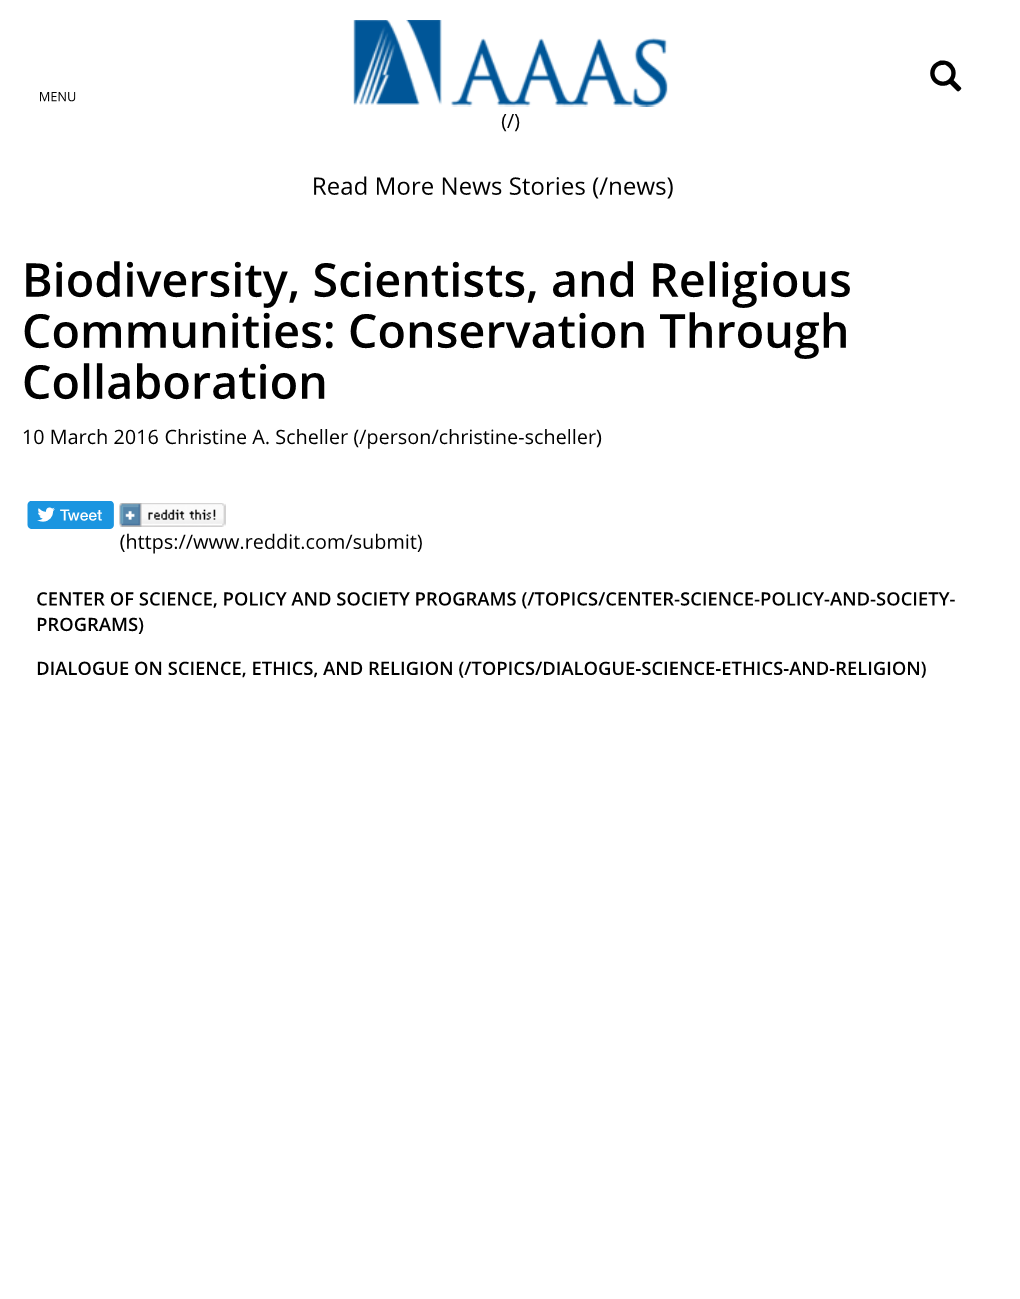 Biodiversity, Scientists, and Religious Communities: Conservation Through Collaboration 10 March 2016 Christine A